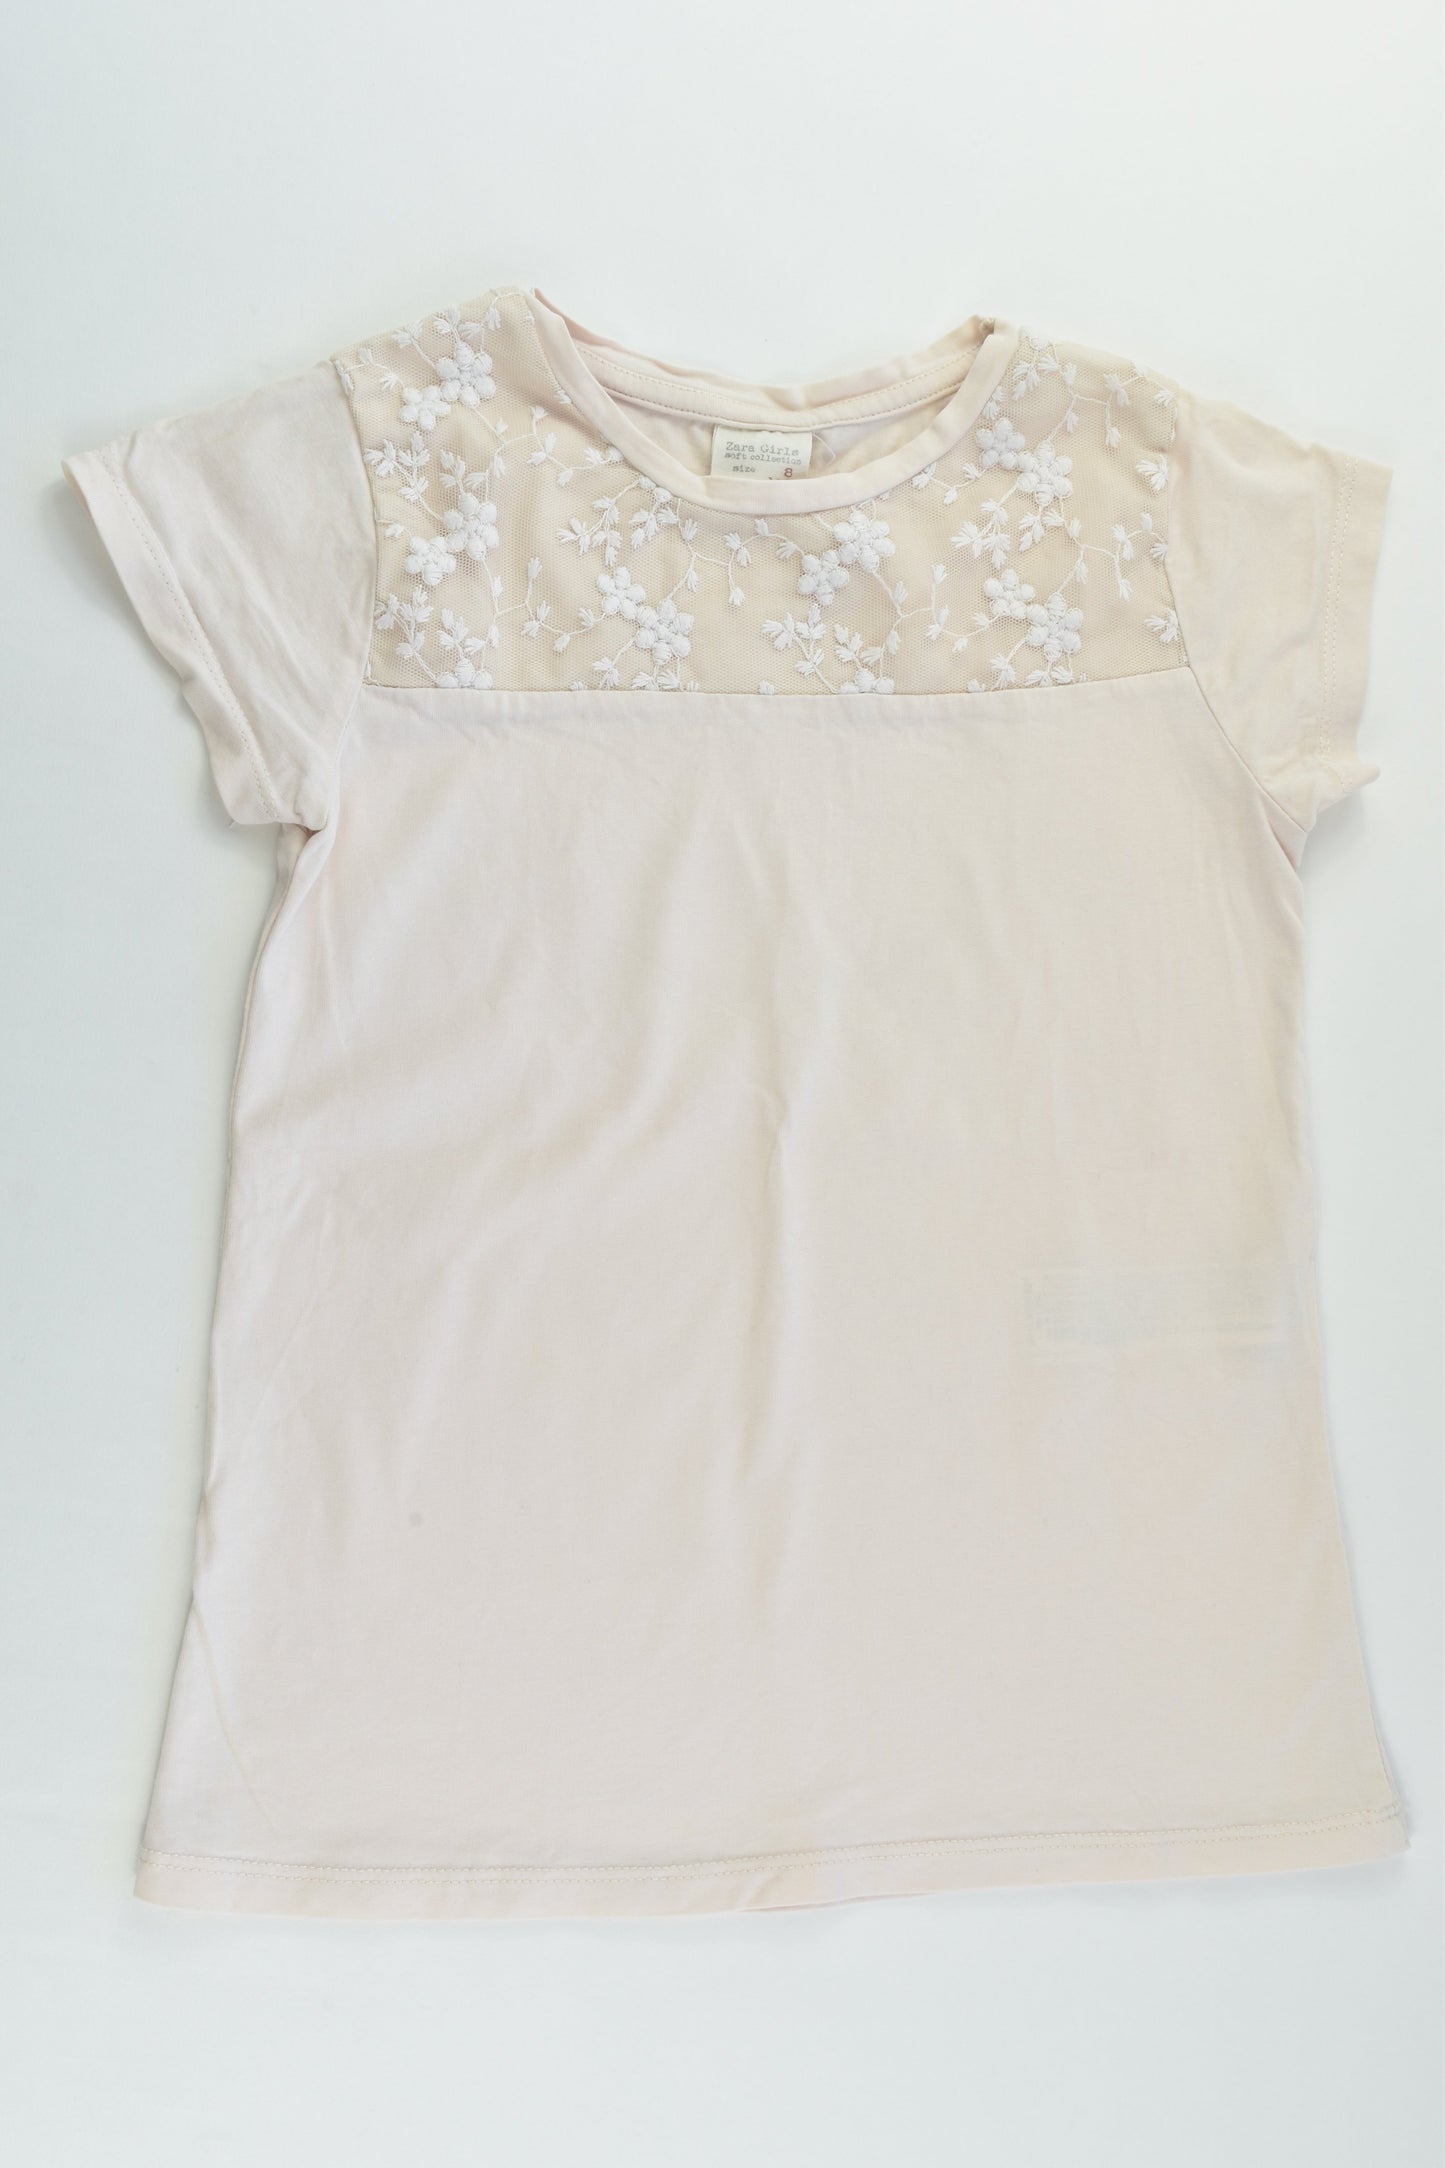 Zara Size 8 (128 cm) T-shirt with Lace Detail